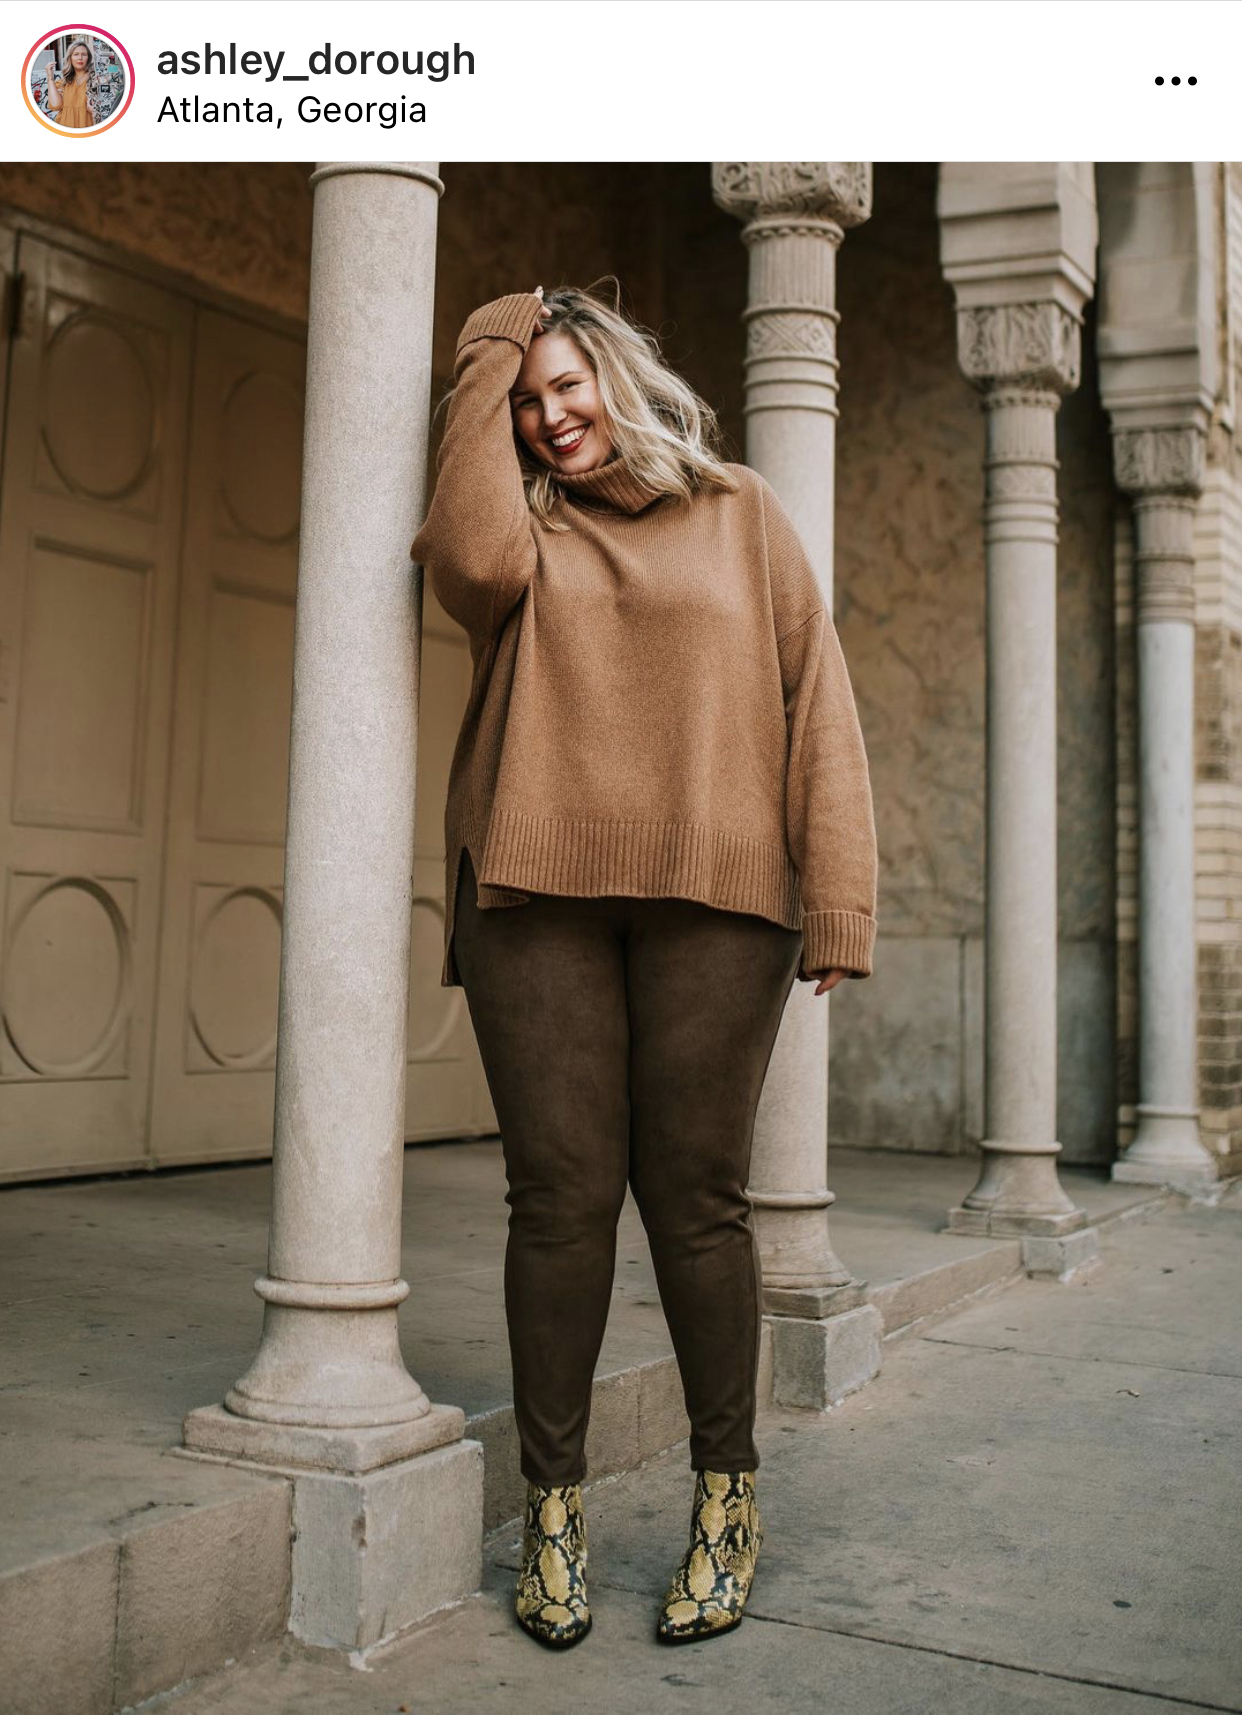 Stylish Legging Outfits for Curvy Ladies - 10 Trendy Ways to Rock Leggings  in Plus Sizes